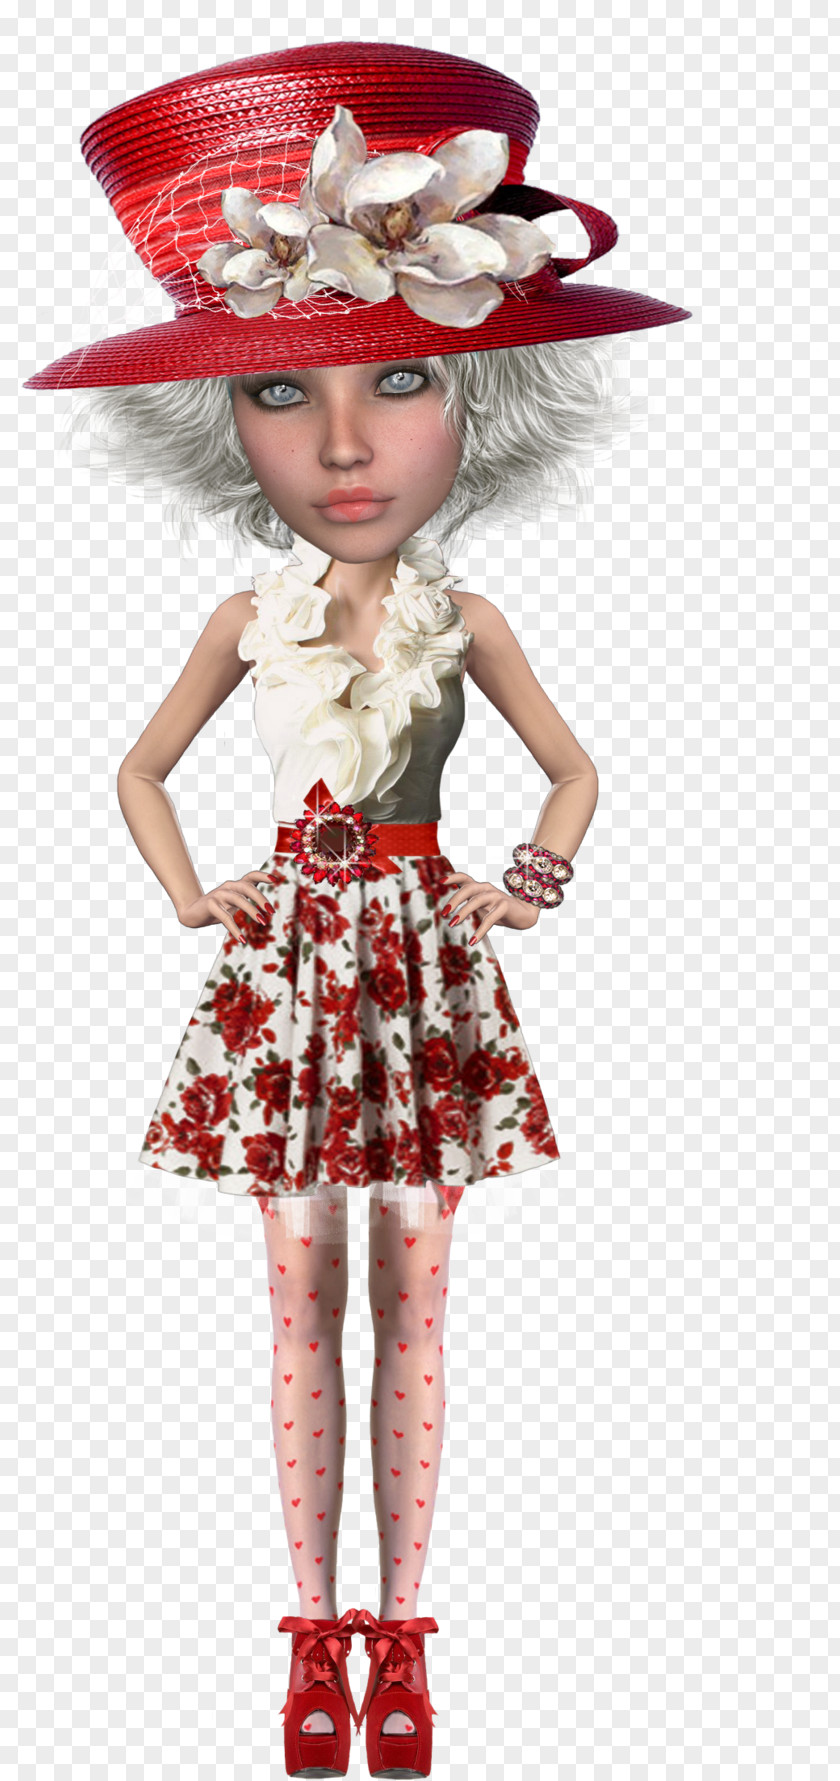 Taylor Swift The Coca-Cola Company Doll Fashion PNG